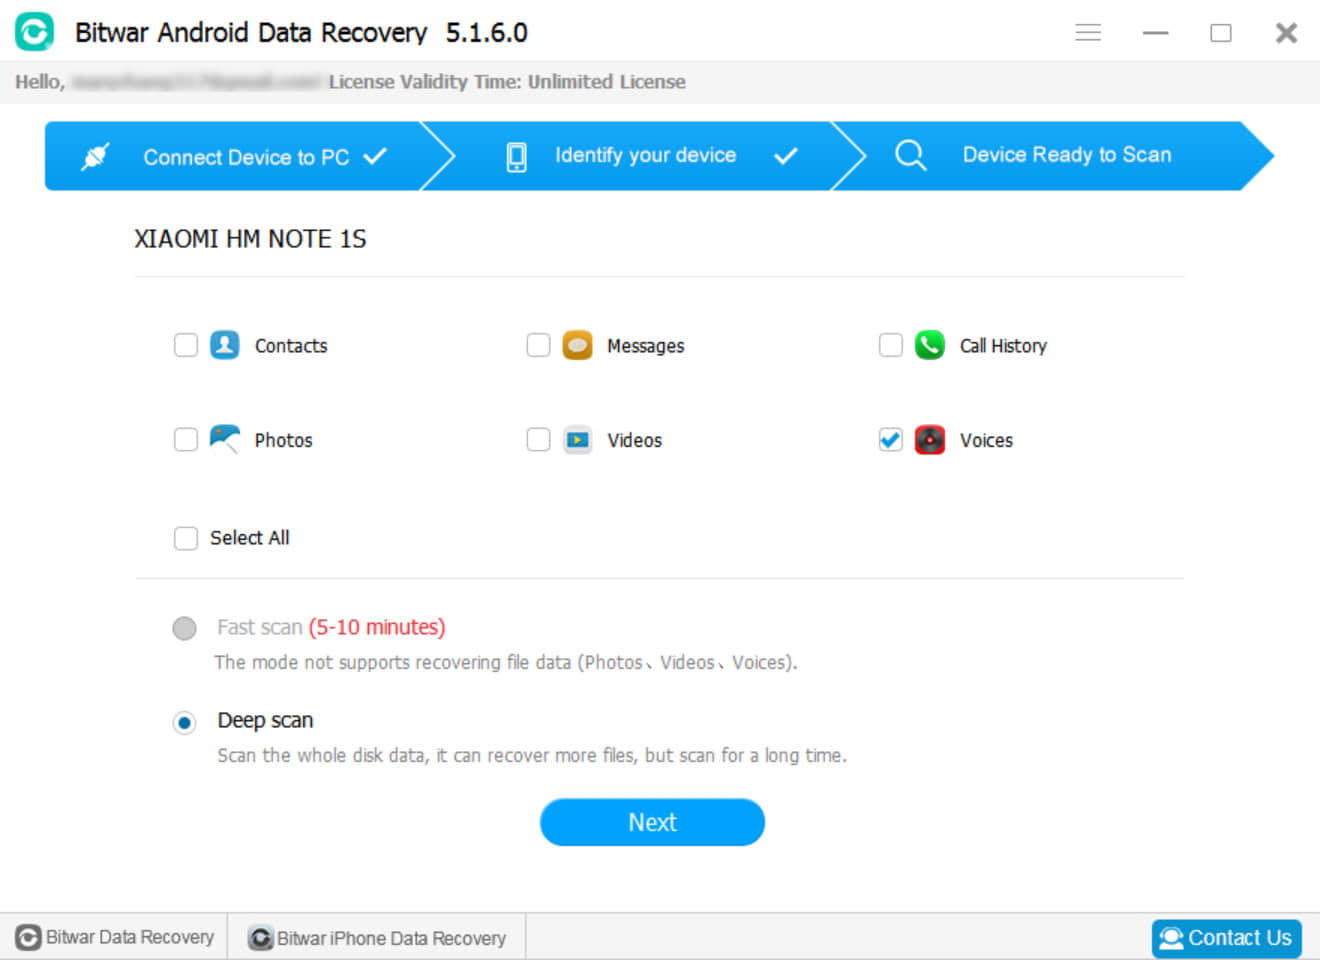 1.Bitwar Android Data Recovery